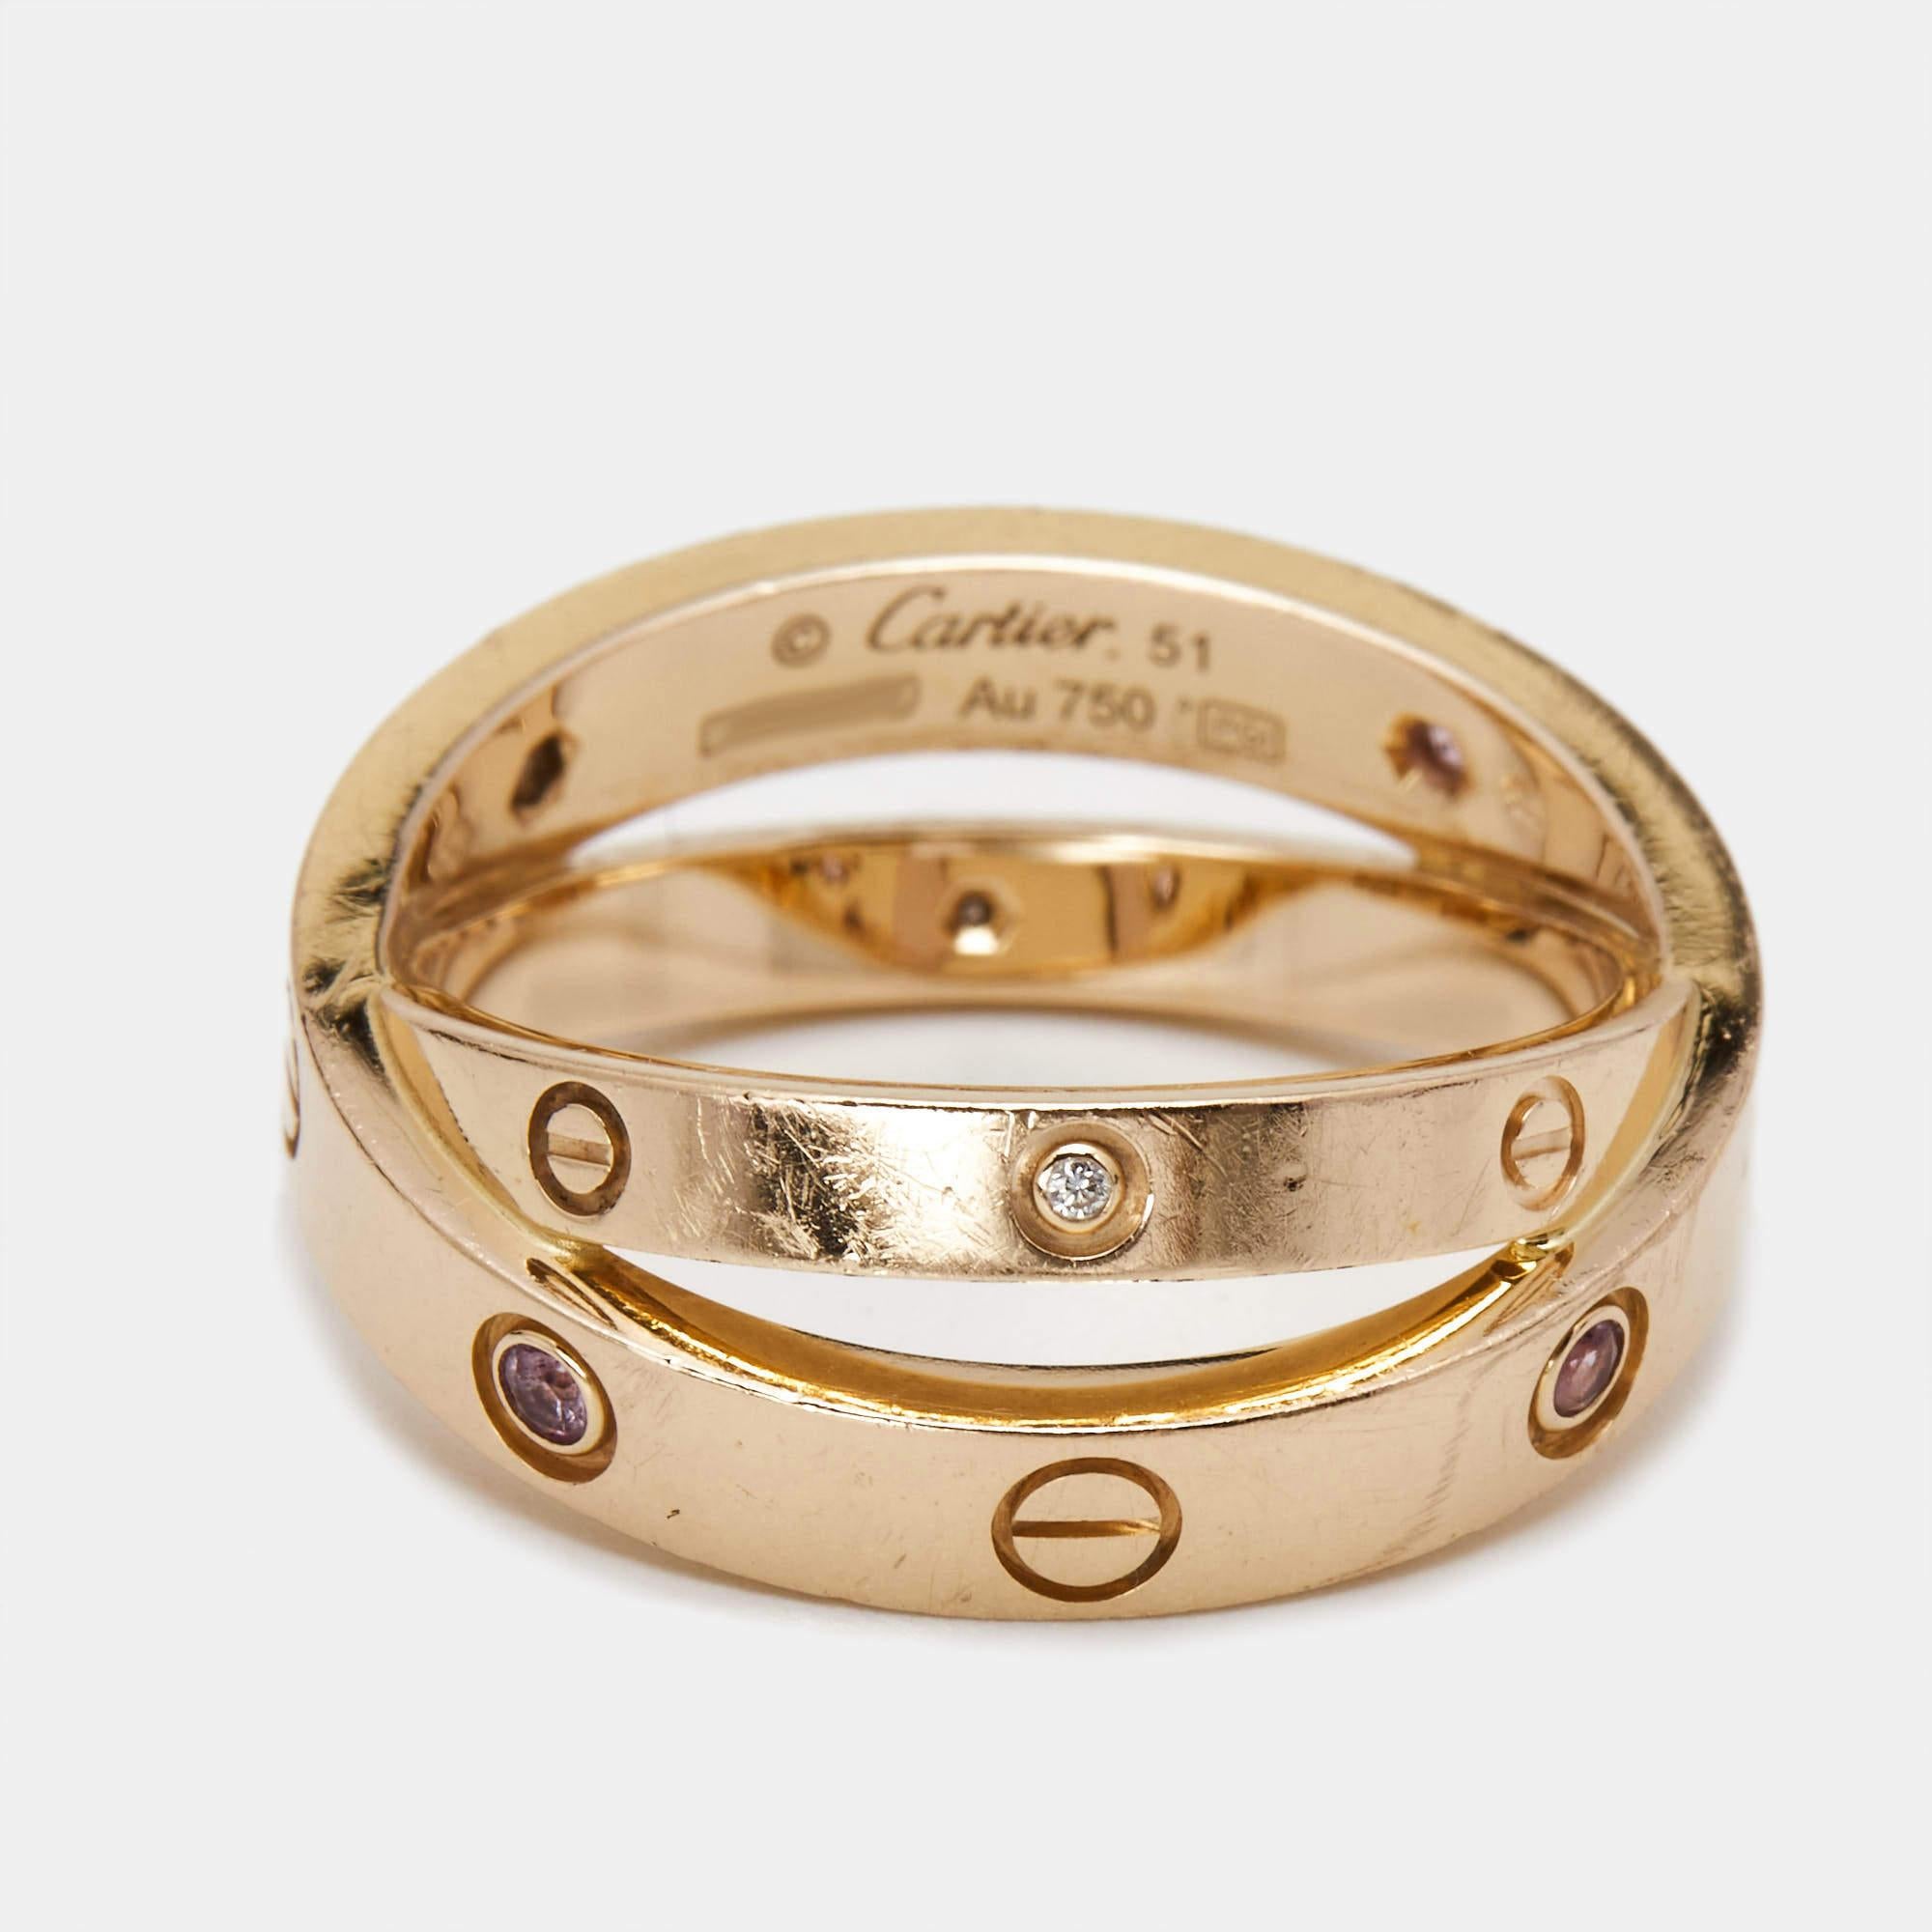 One of the most iconic and loved designs from the house of Cartier, the stunning Love ring is an icon of style and luxury. This is an updated version that arrives in two bands, both in 18k rose gold. The rings feature diamonds, sapphires, and screw